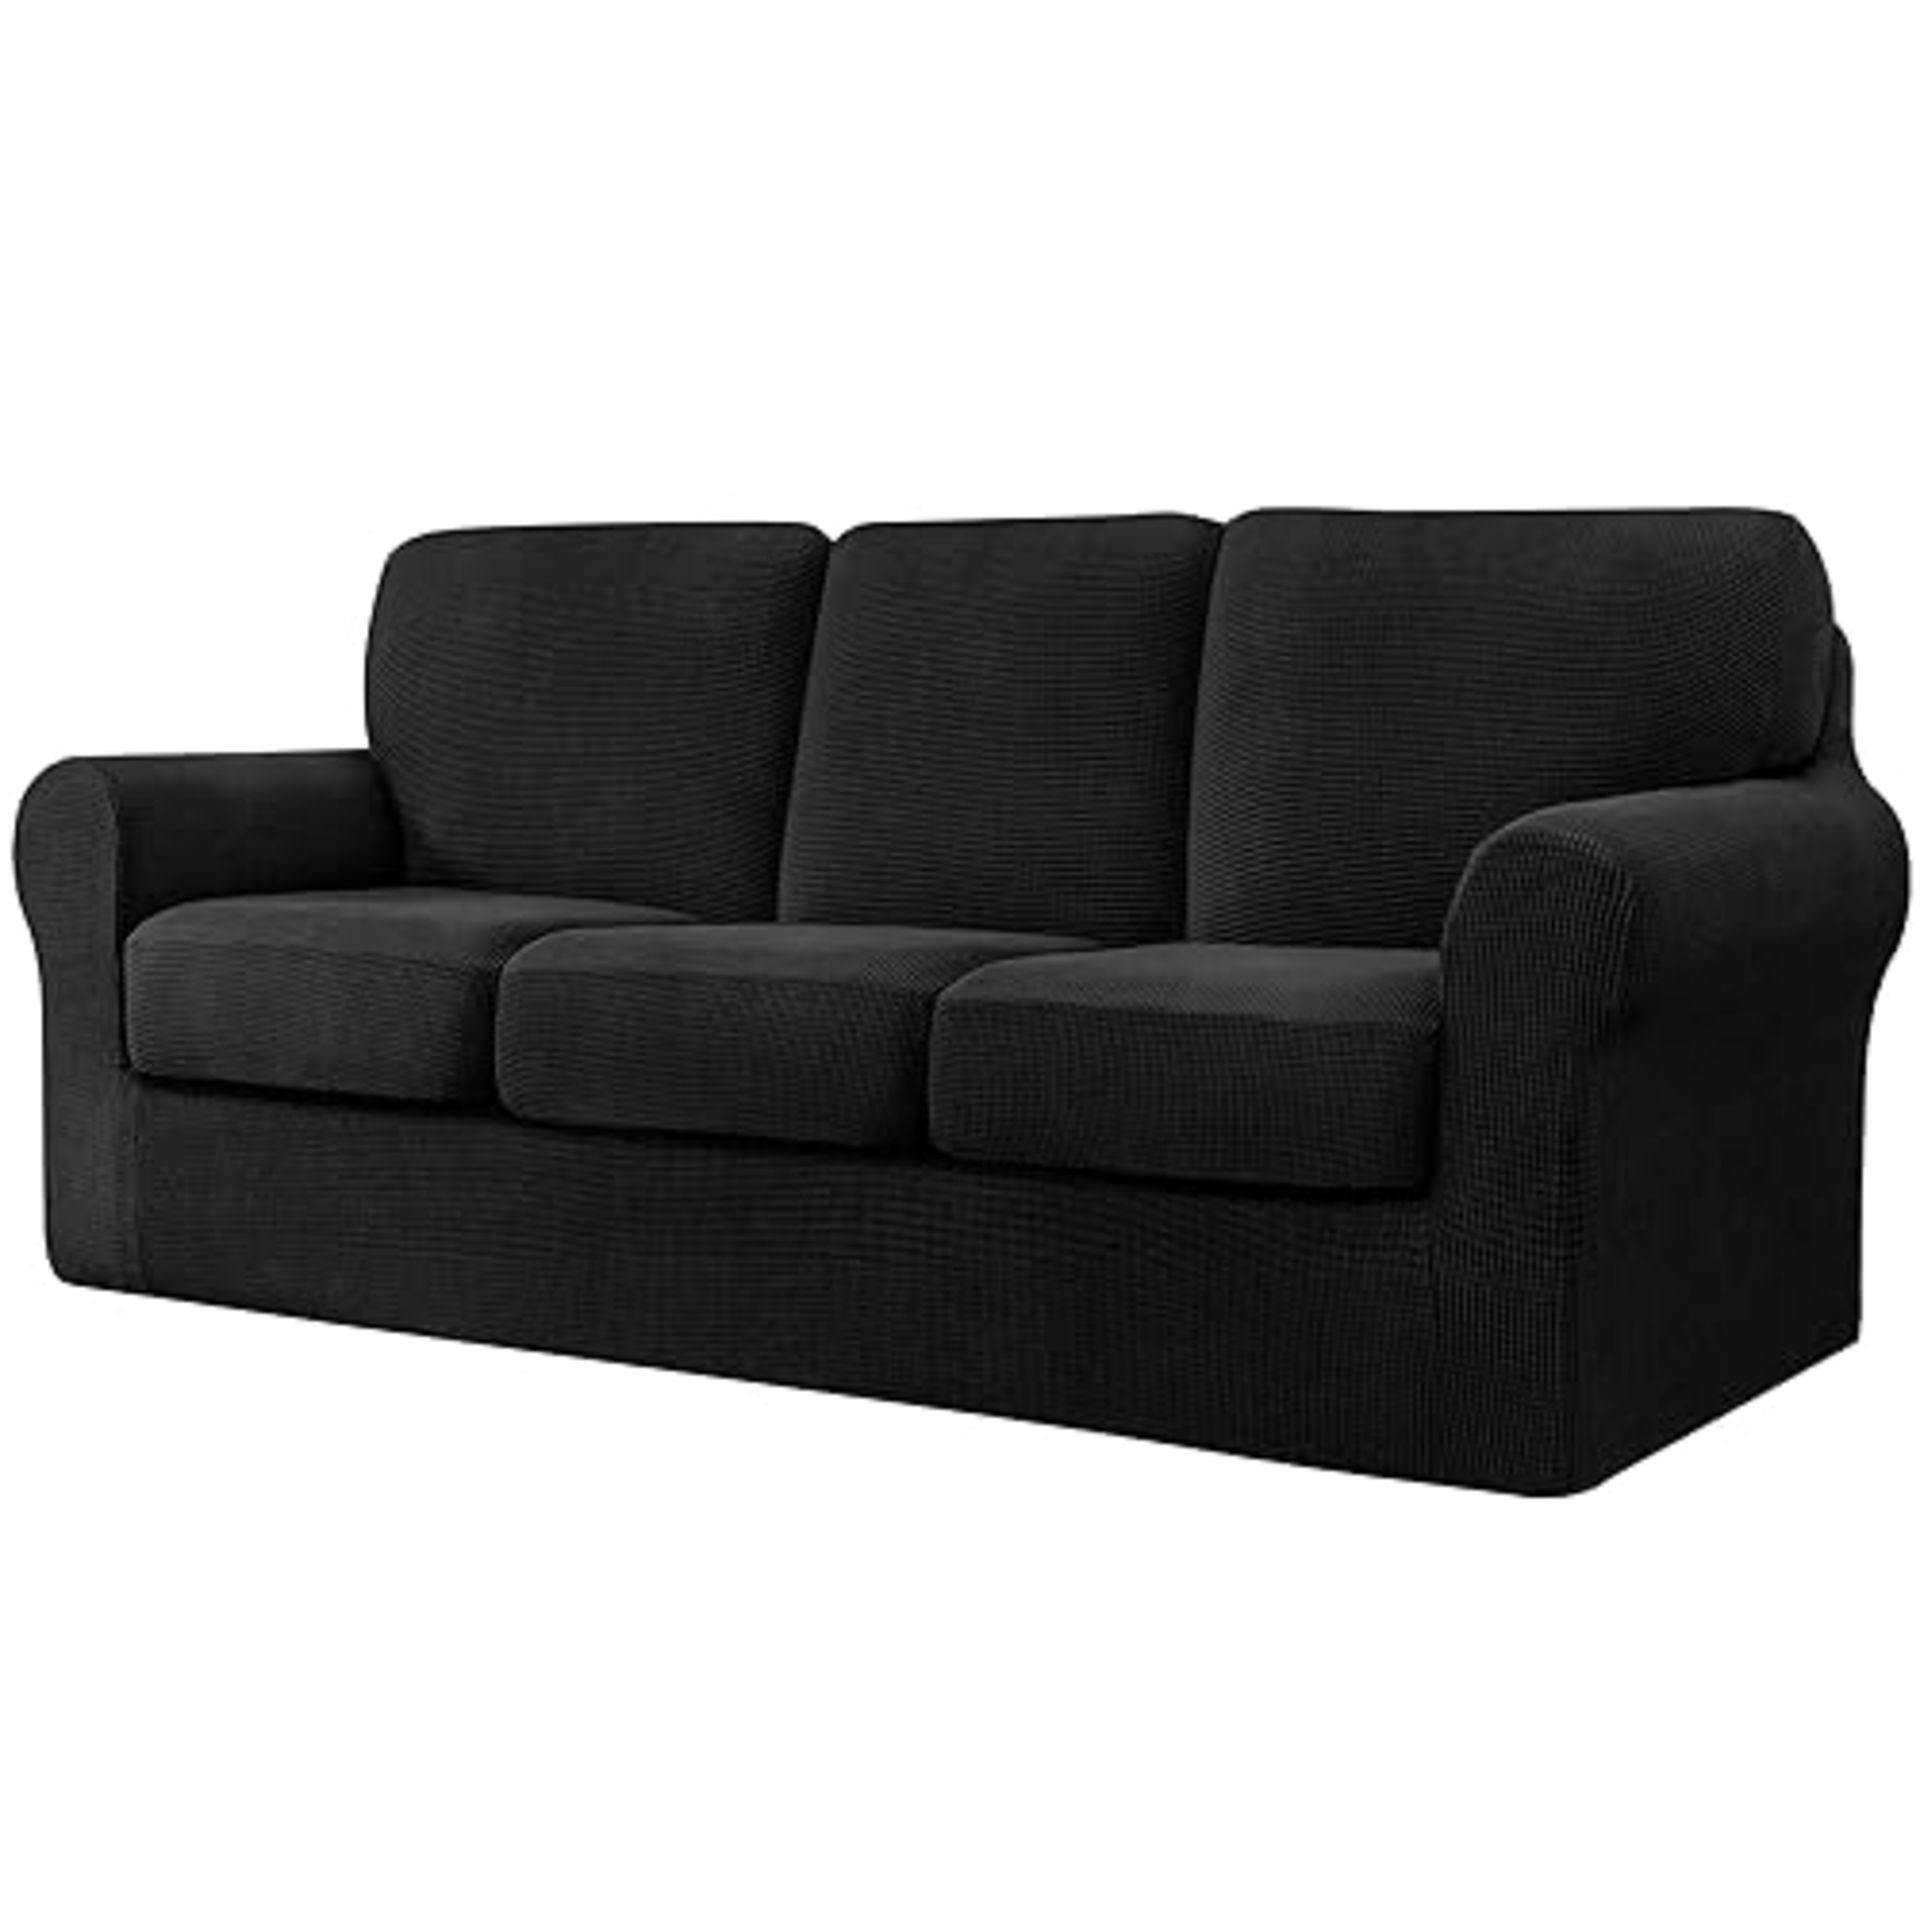 CHUN YI 7 Pieces Stretch Sofa Cover 3 Seater with Three Separate Cushions and Backrests Stylish Jac